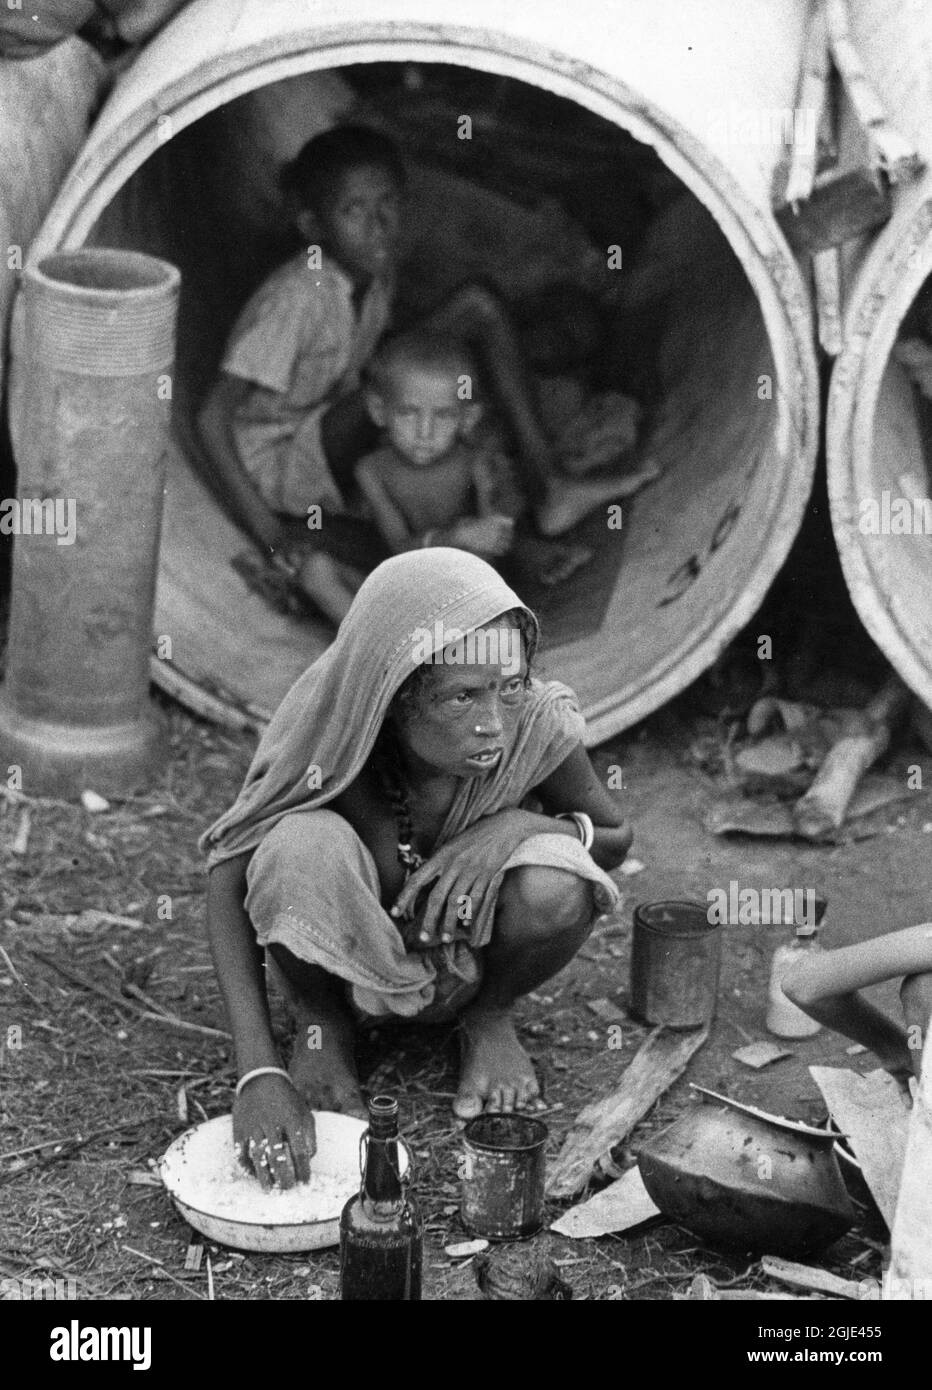 Calcutta 1971-06-24 The authorities have made attempts to prevent the refugees from reaching Calcutta but in vain. This photo was taken in the Salt Lake City camp inside Calcutta. Some refugees have managed to find shelter in the large cement pipes on the site. Photo: Leif Engberg / DN / TT / code 15  Stock Photo